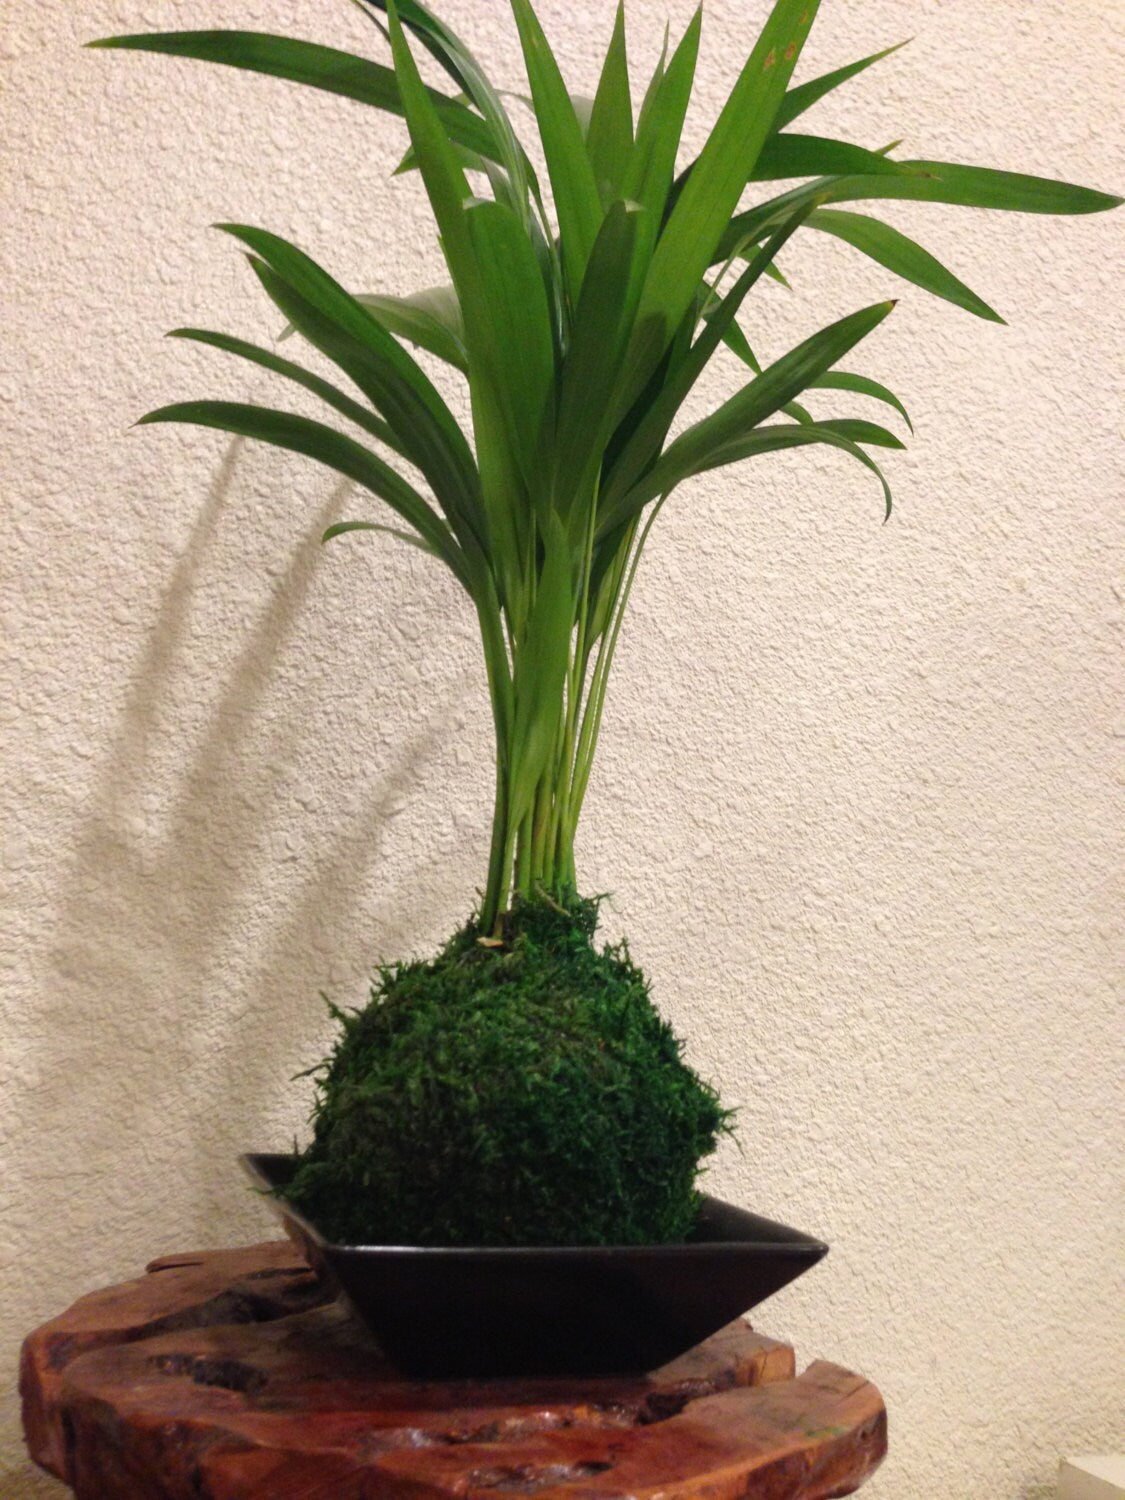 Kokedama - Moss ball with Maya Palm, easy care, long lasting. Japanese traditional indoor garden technique.